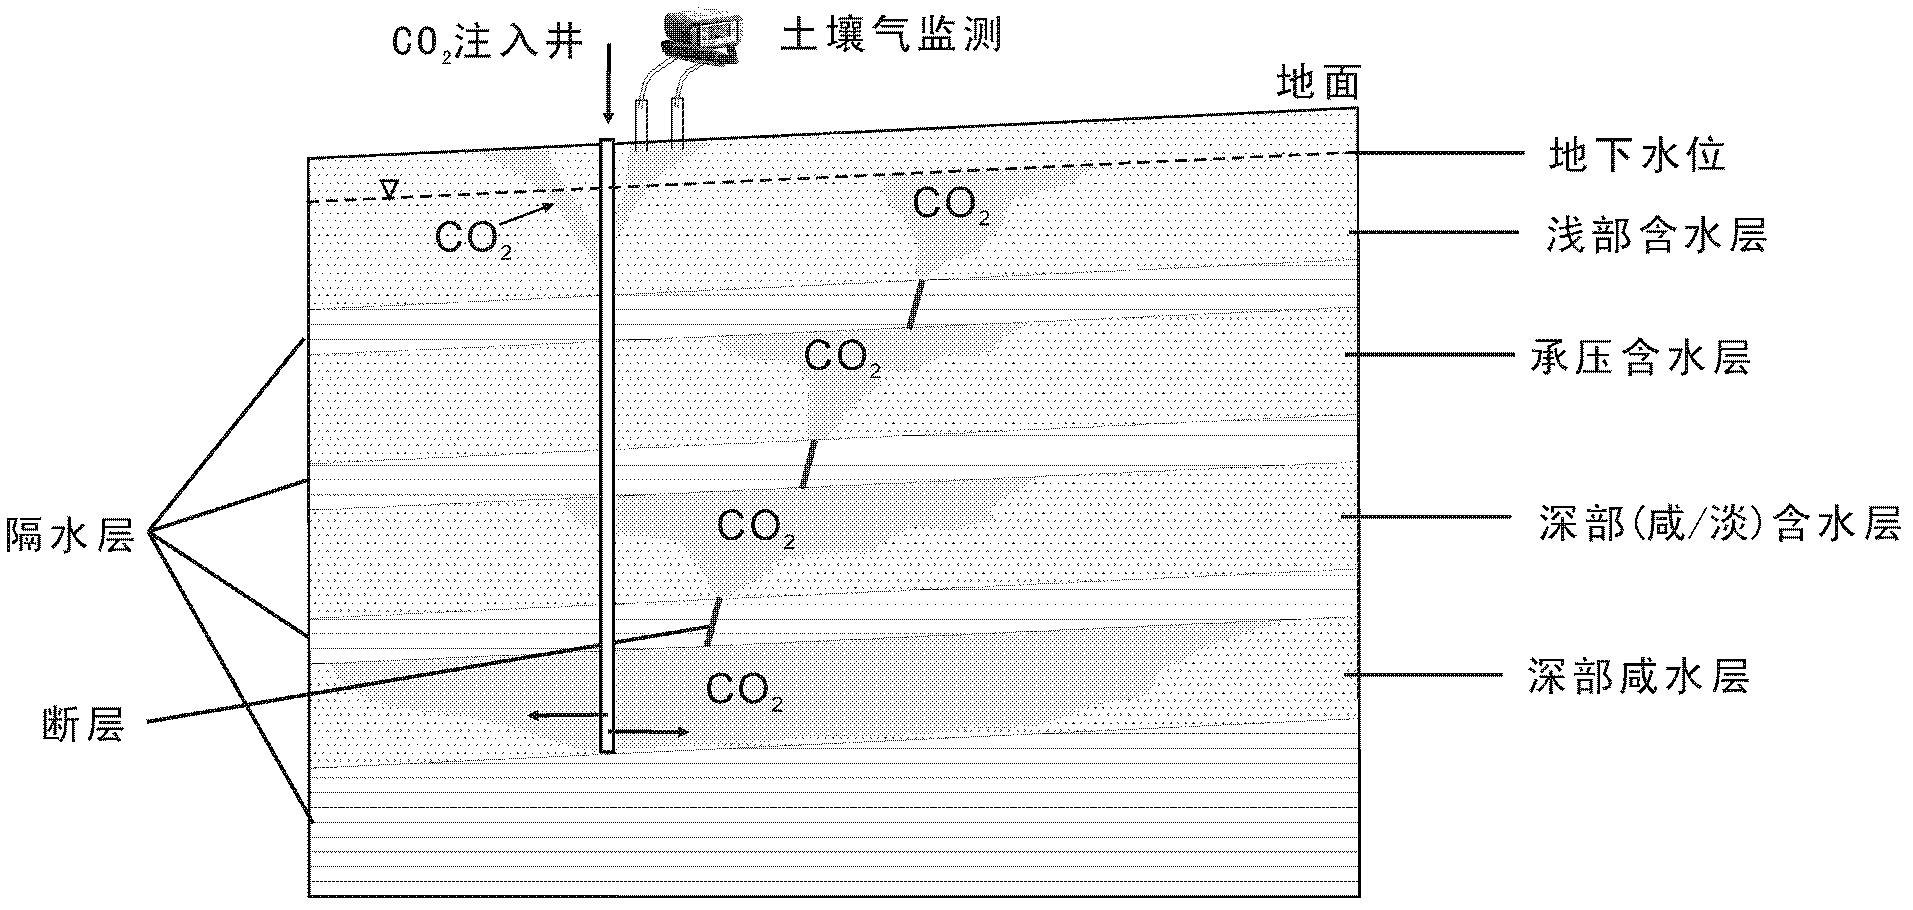 Method for measuring leakage caused by drilling in geological storage process of CO2